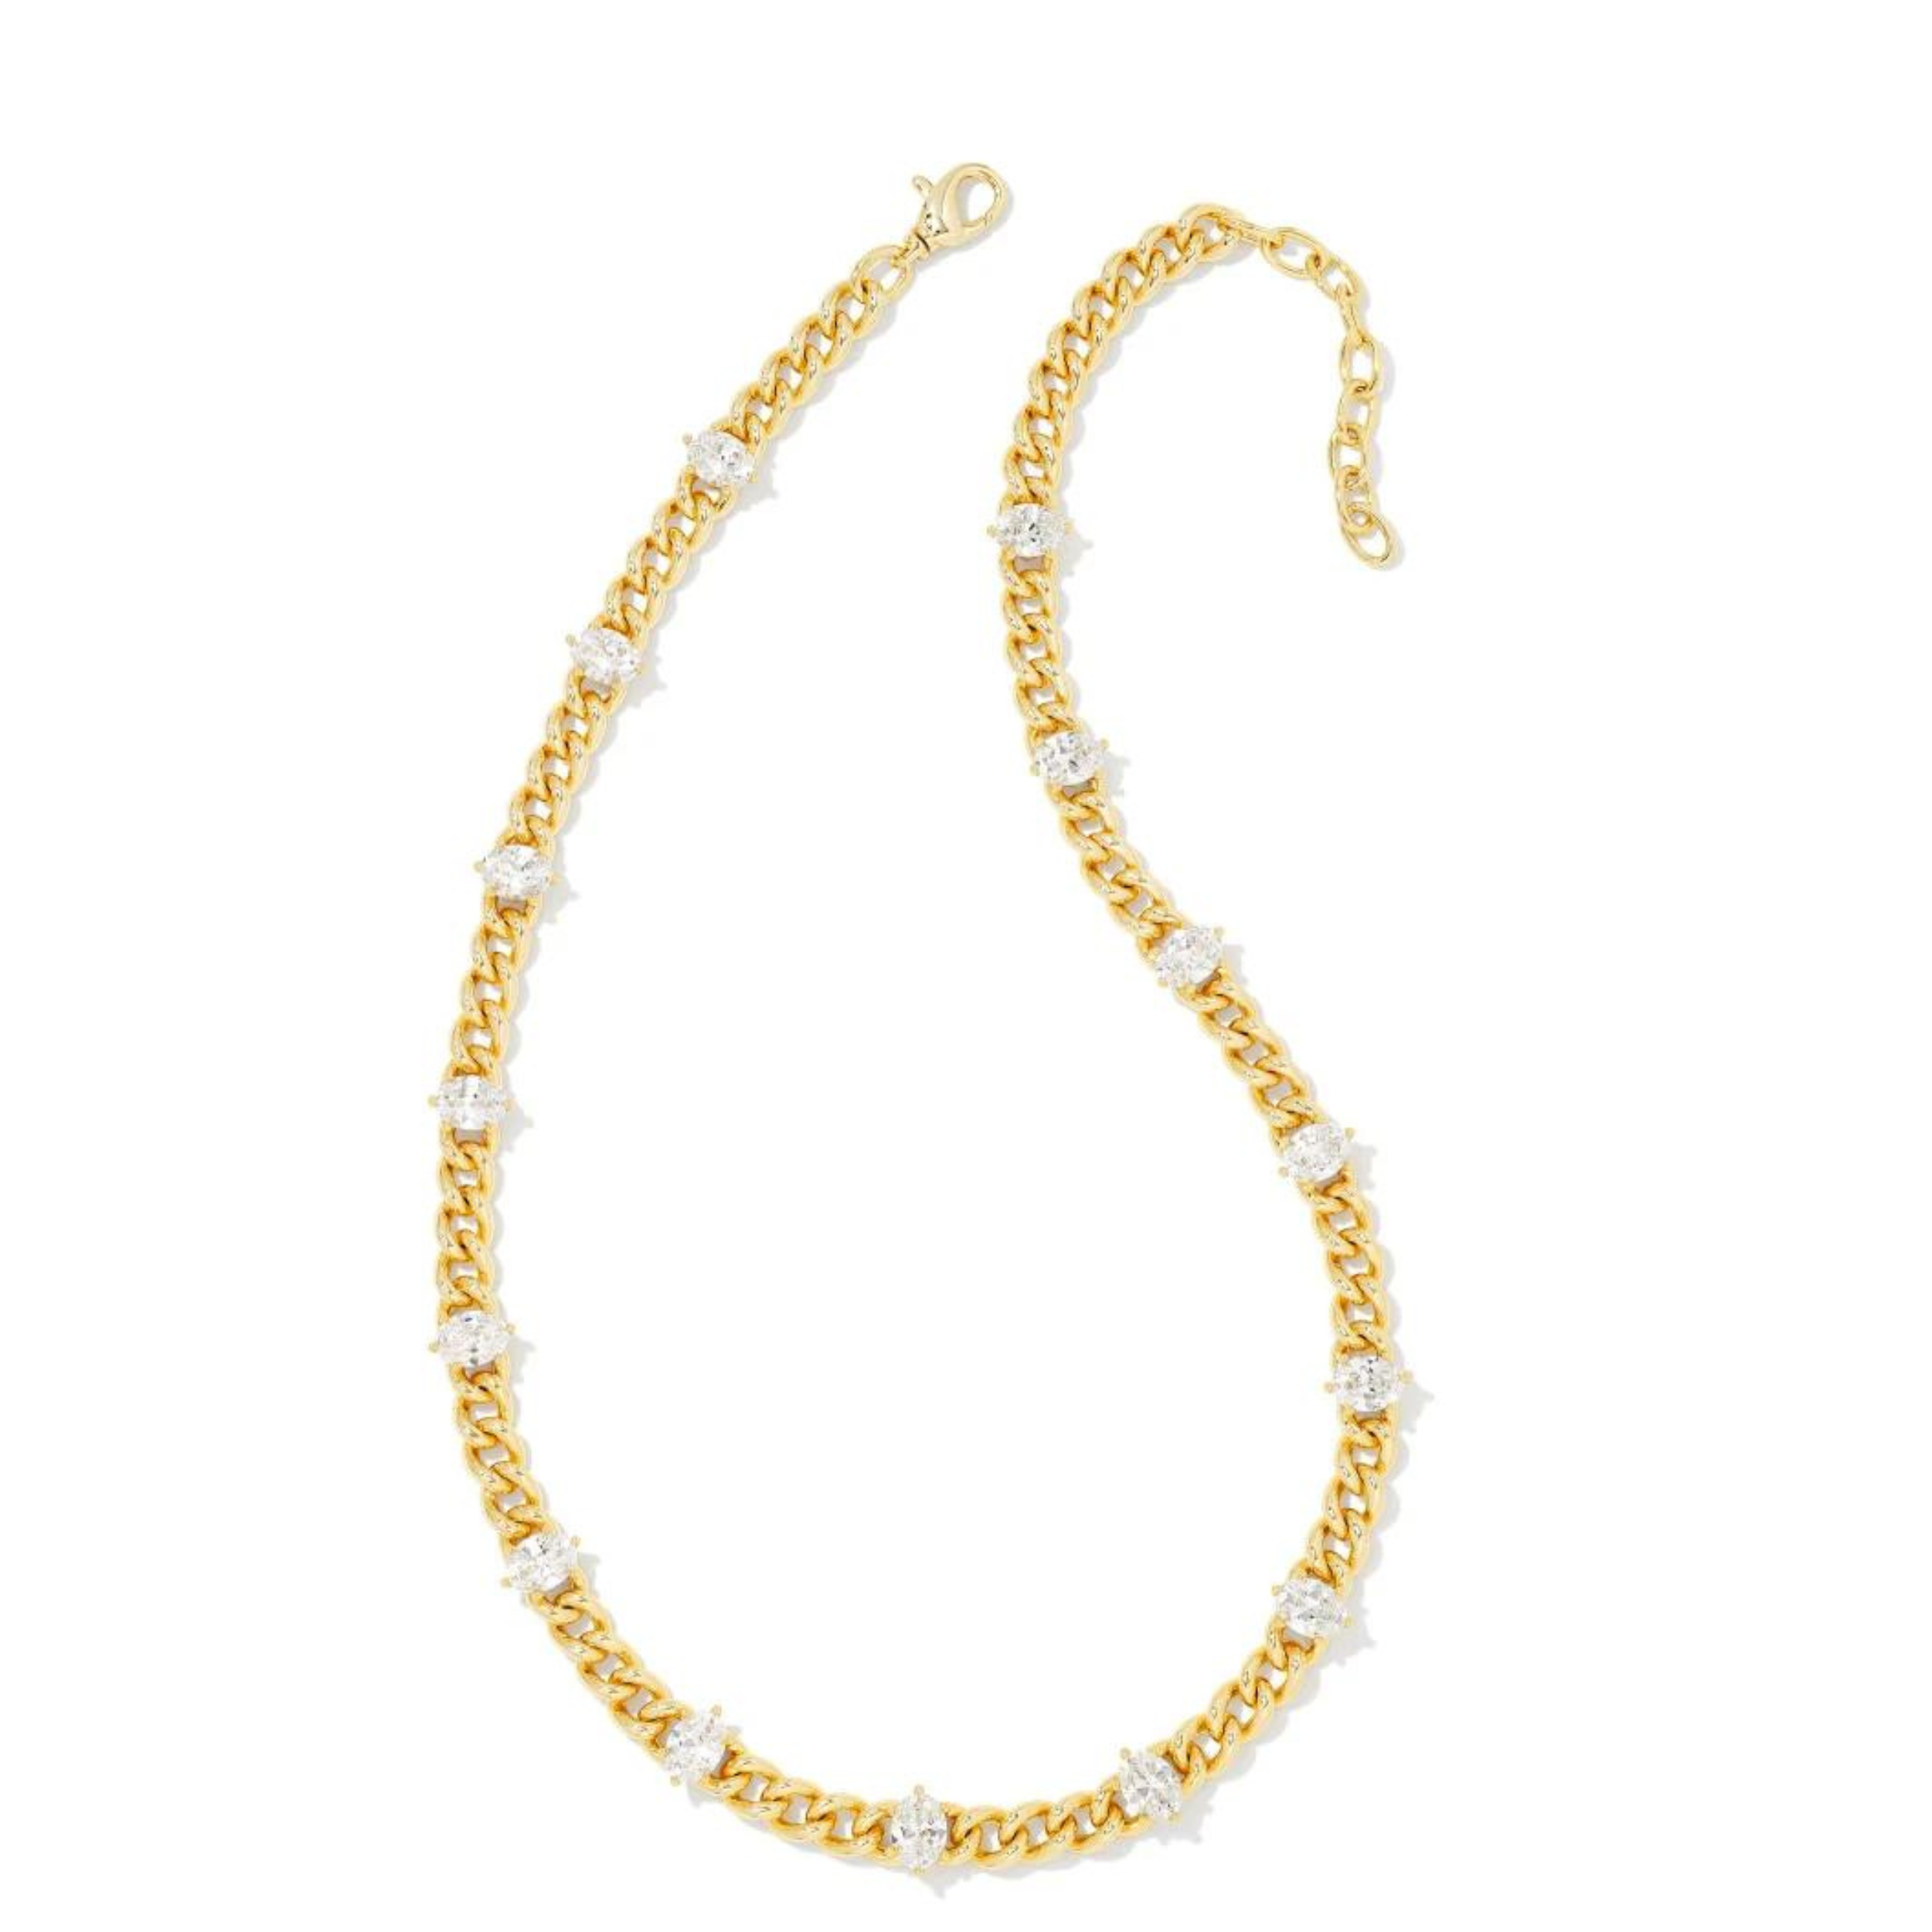 Gold chain necklace with white crystals, pictured on a white background.